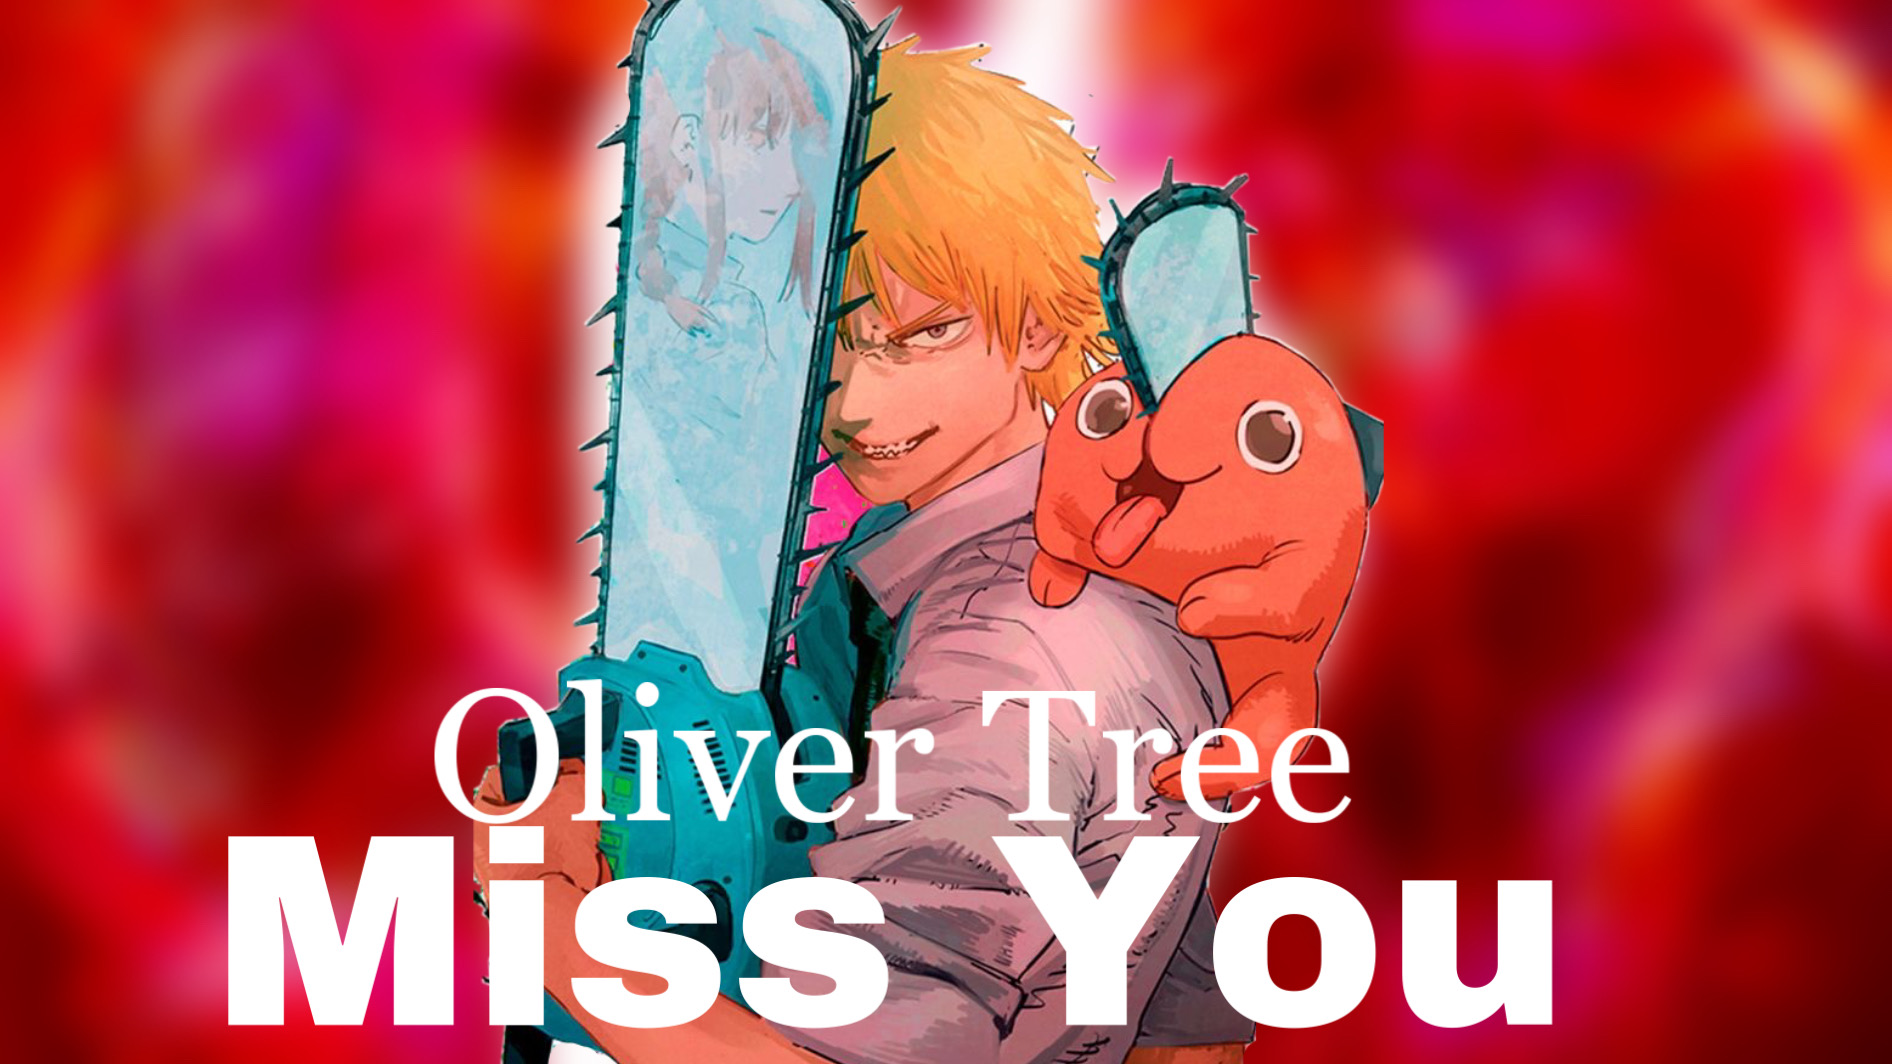 [ Oliver Tree  Miss You ] -Chainsaw man AMV EDIT